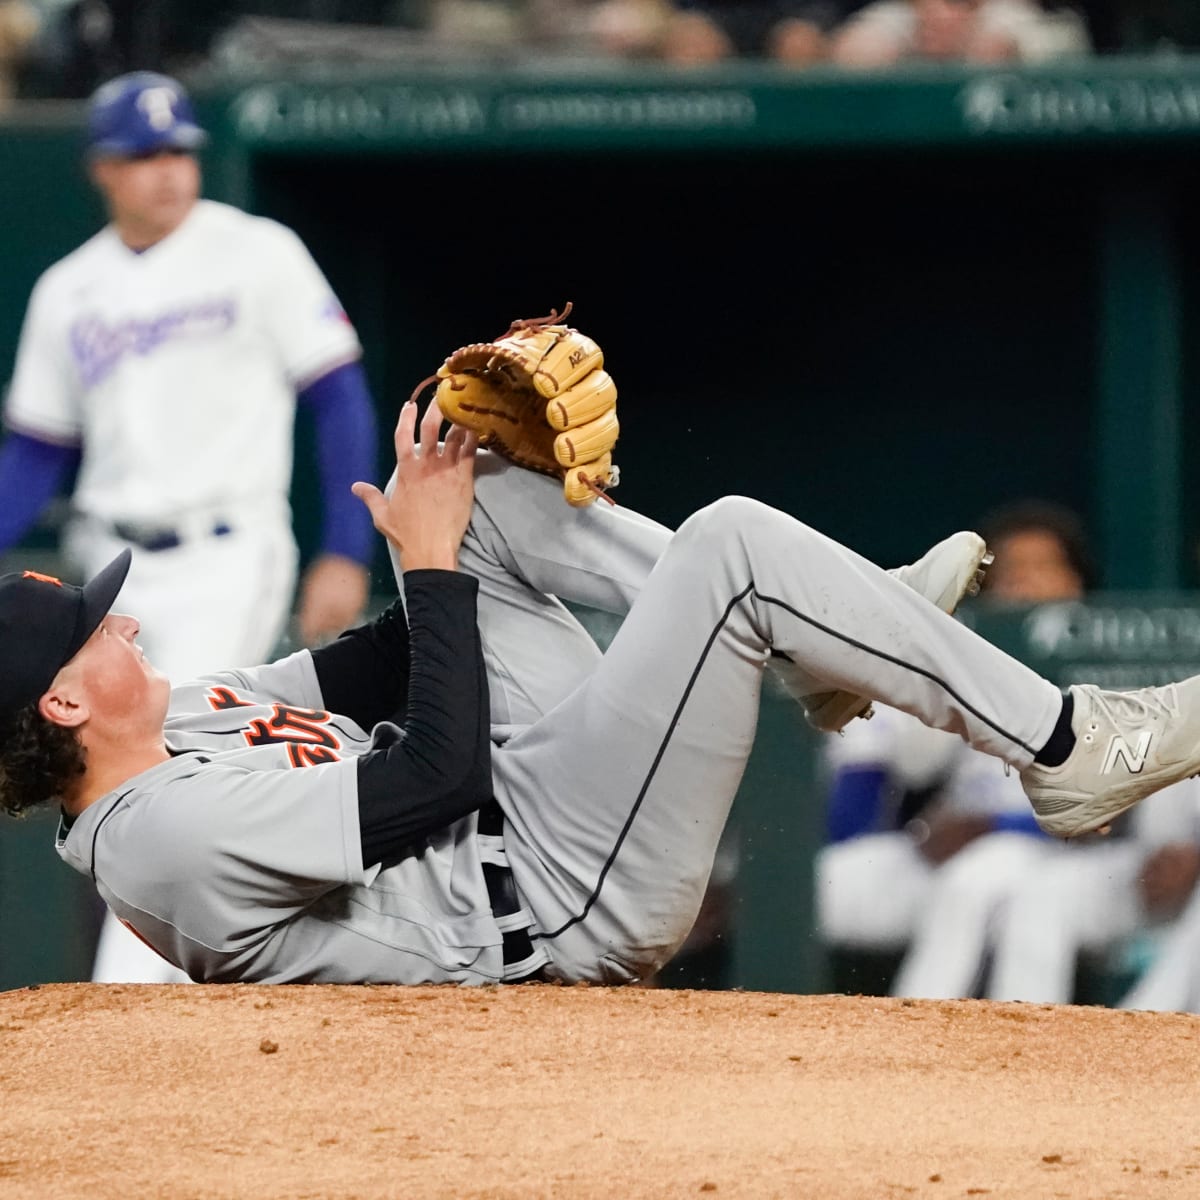 Texas starter Gray leaves after comebacker hits right elbow